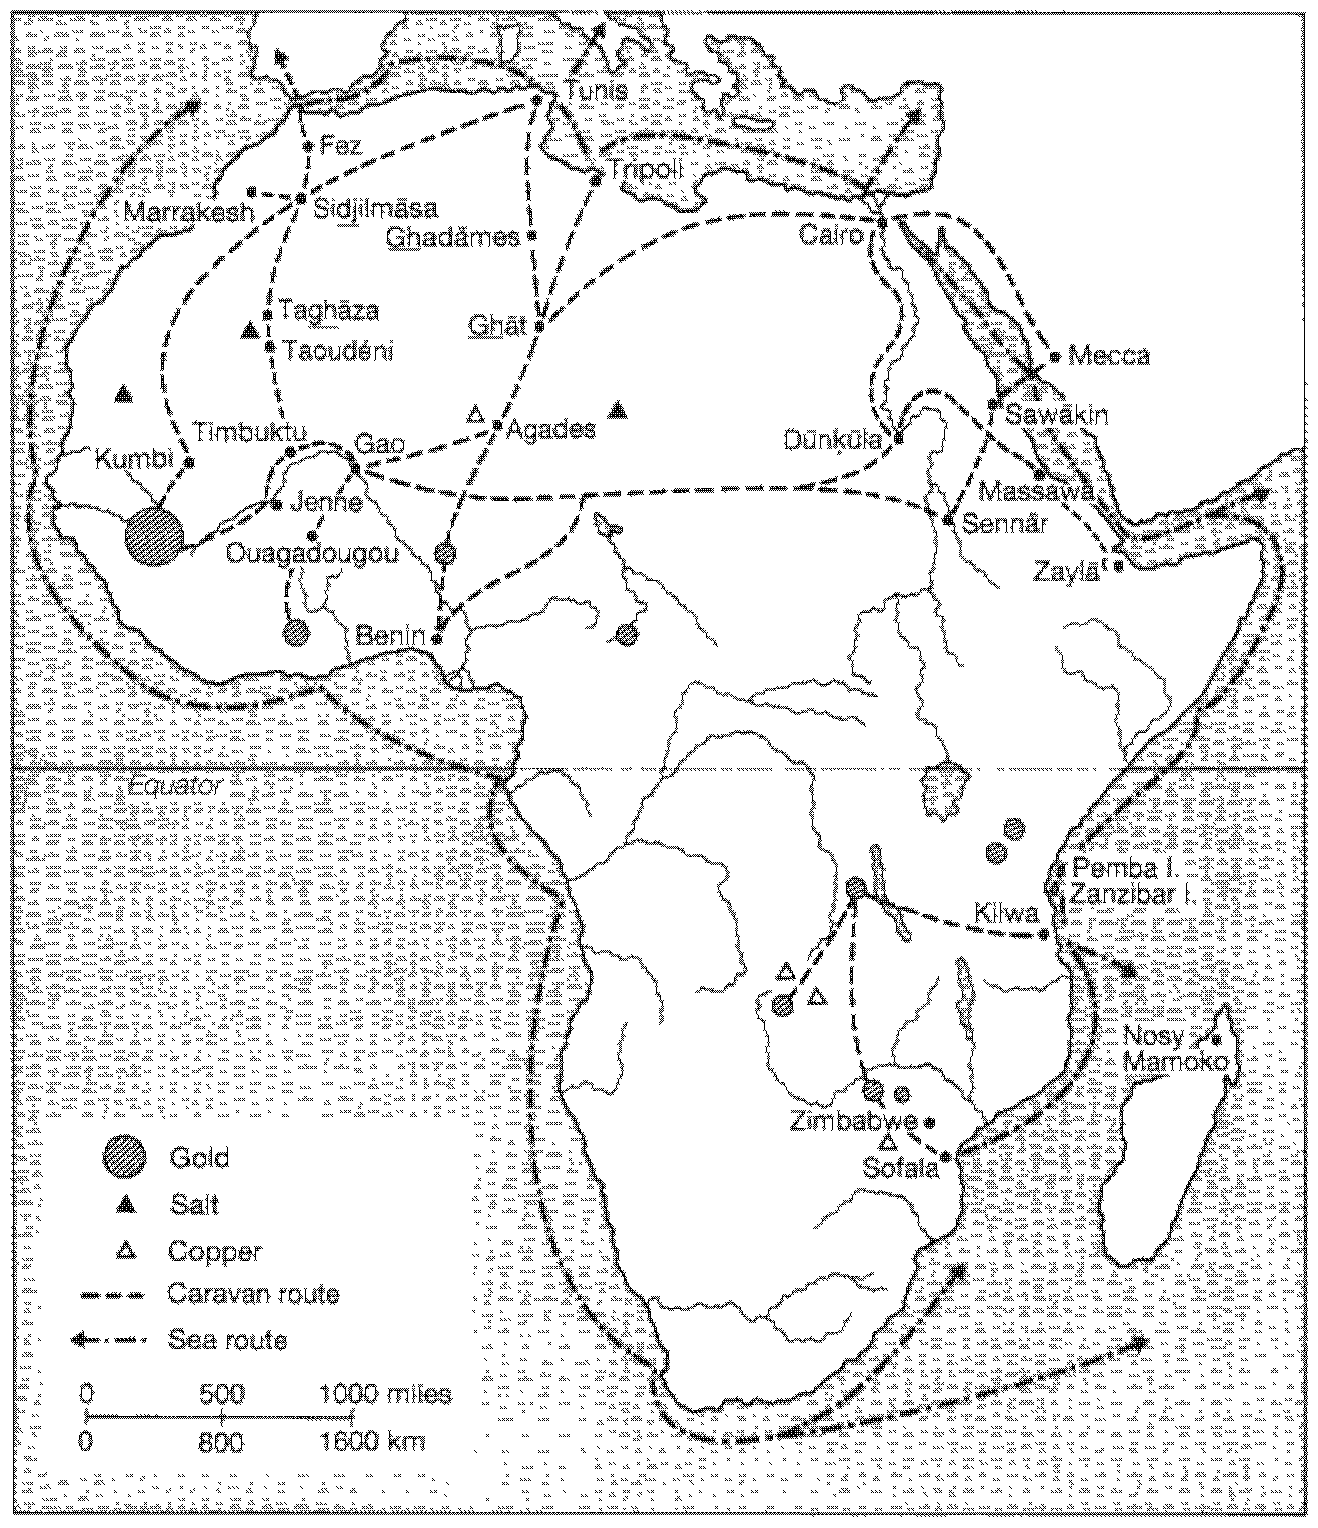 African trade routes in the sixteenth century Source; adapted from map drawn by P. Ndiaye, Dep...png